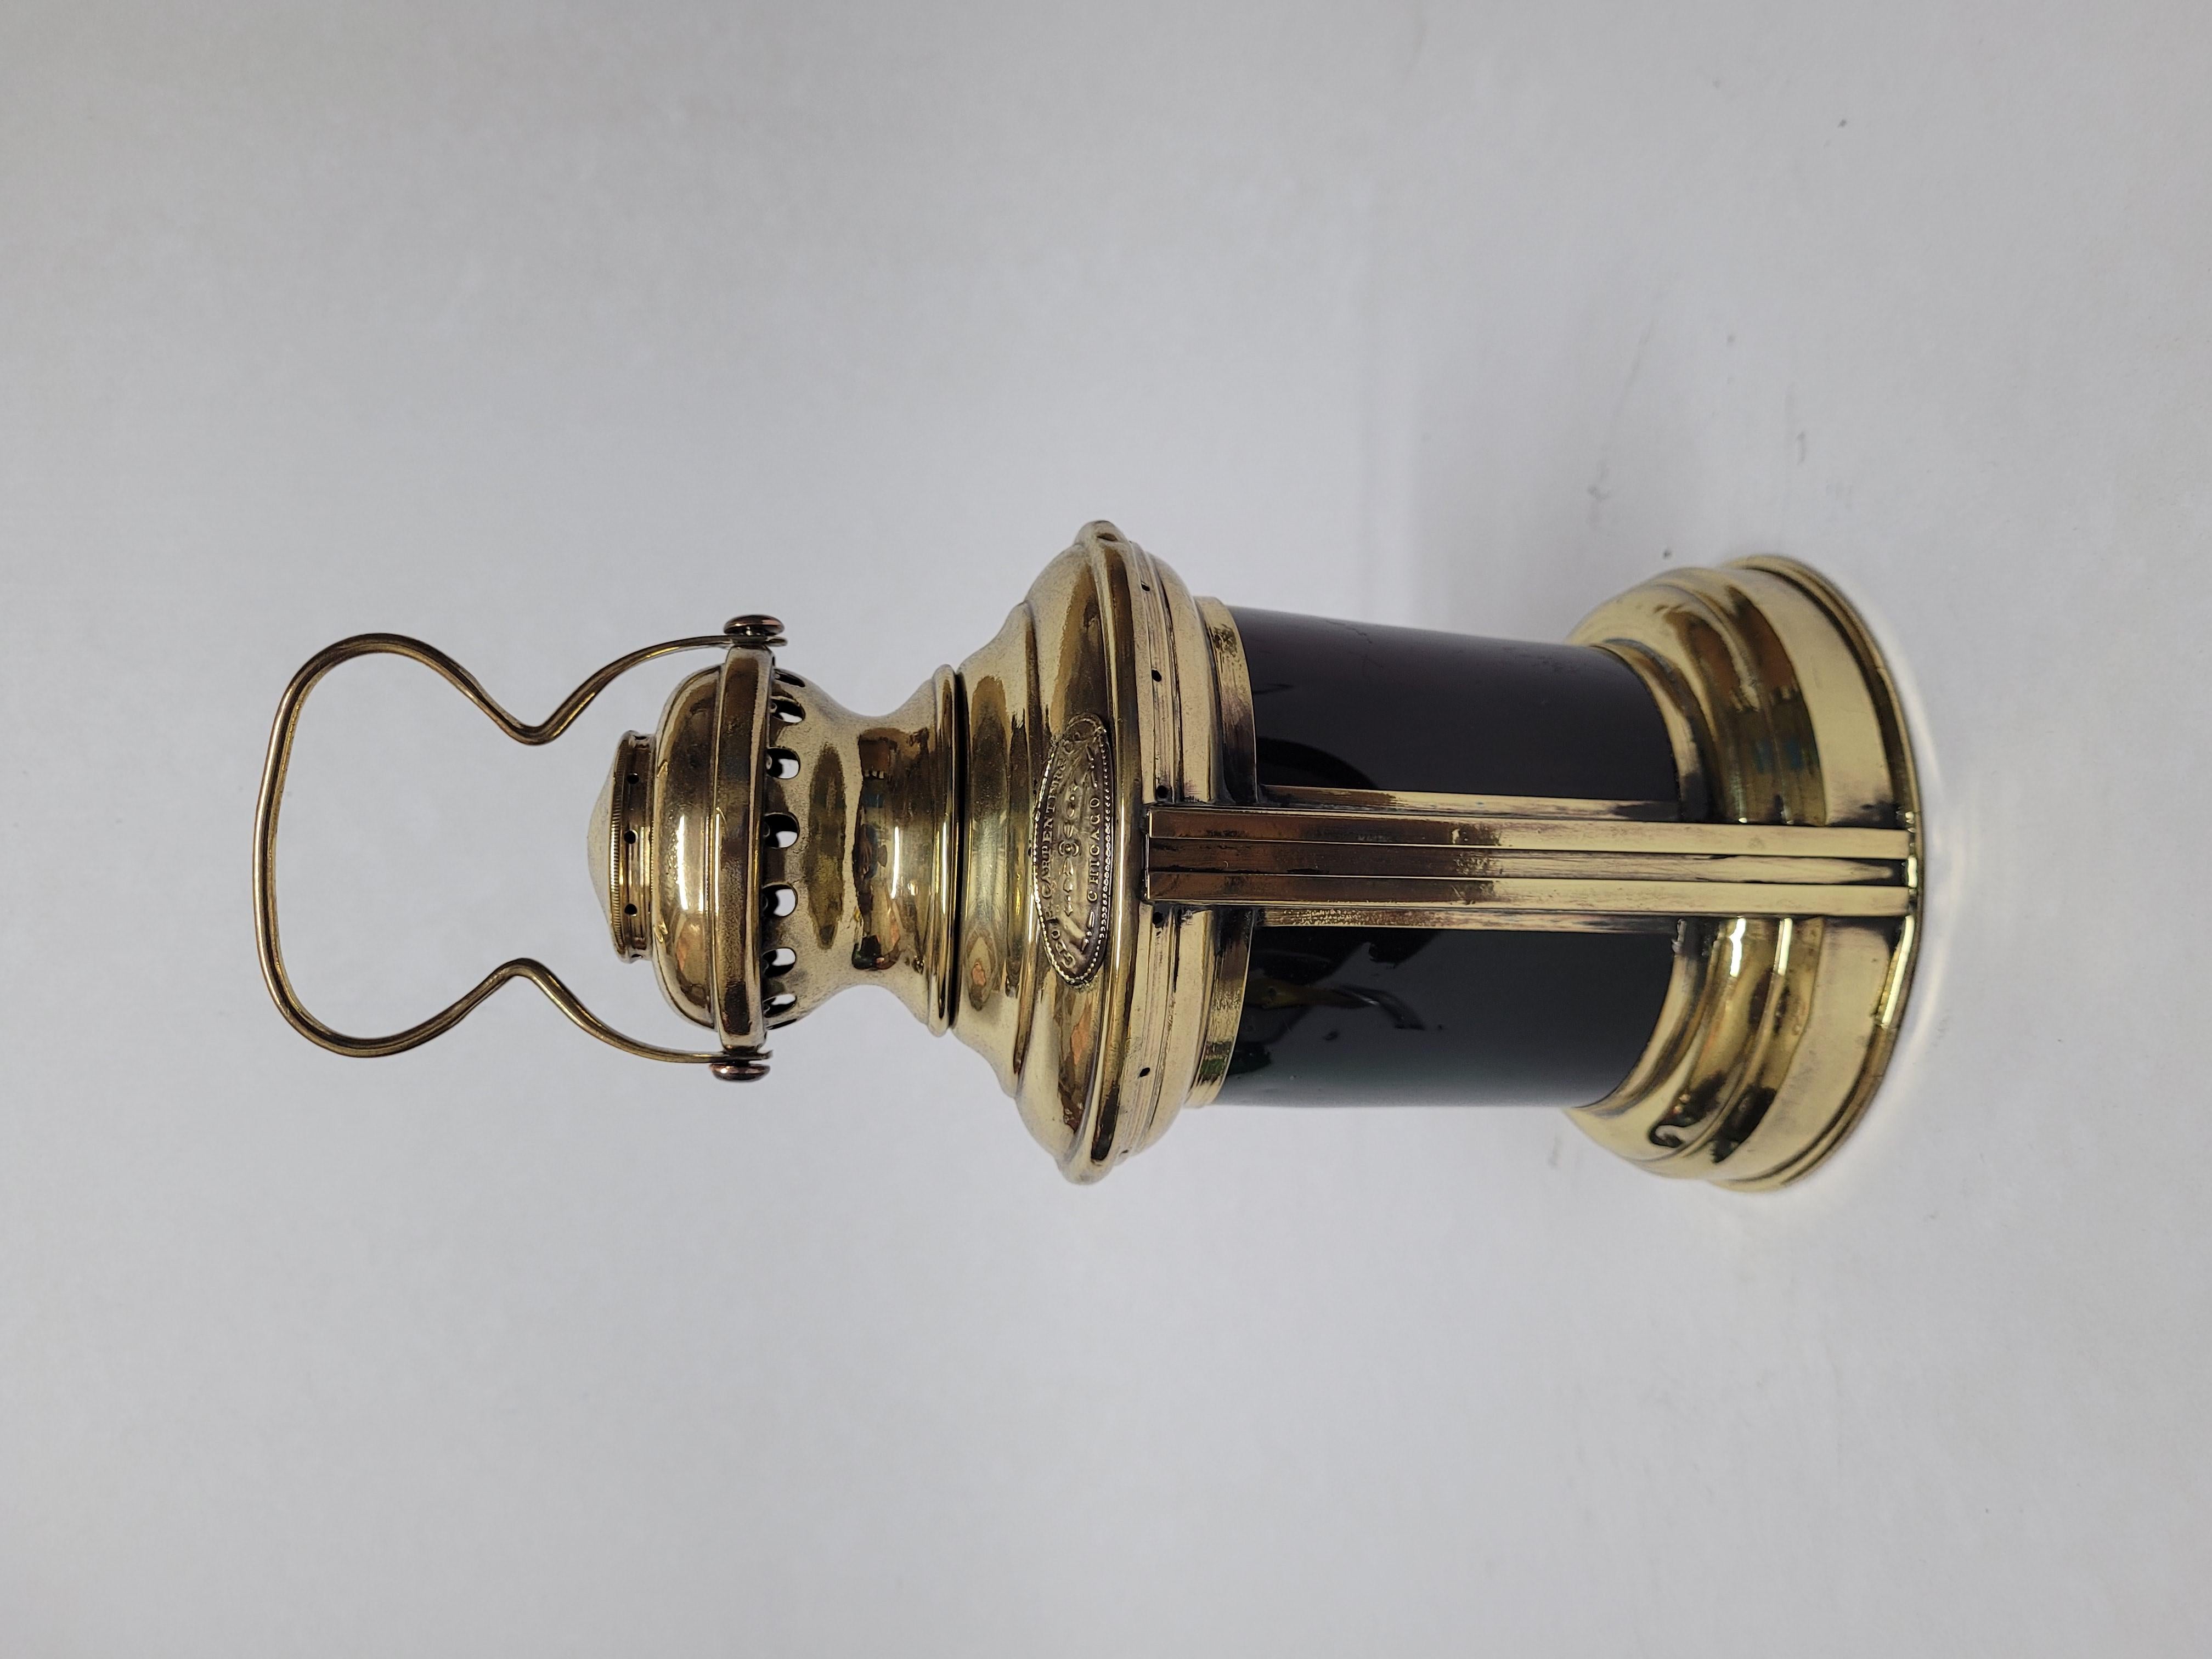 Port and starboard solid brass boat lantern from George Carpenter of Chicago. Curved red and green lenses. With original burner. Meticulously polished and lacqured. Several very small use related dings. Fine nautical antique American. Circa